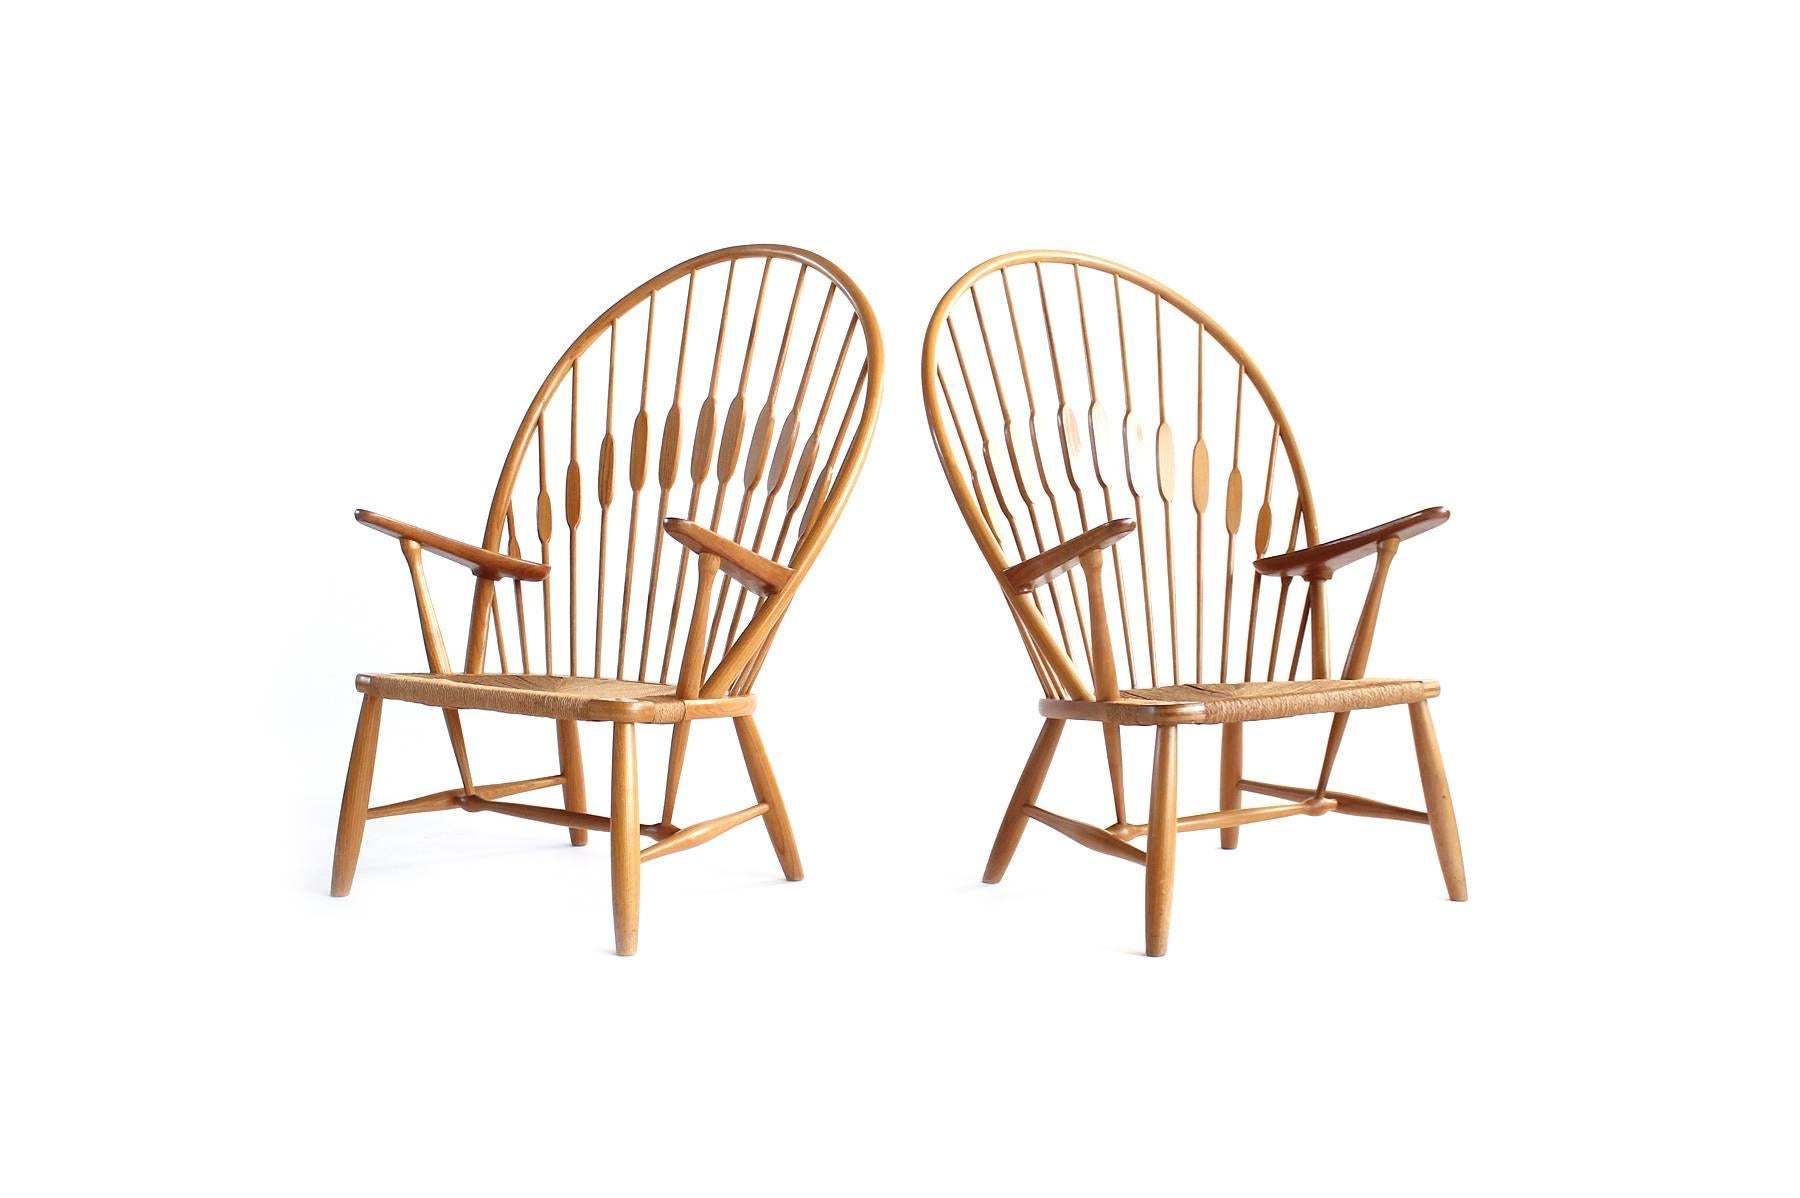  Pair of oak and teak Hans Wegner Peacock Chairs for Johannes Hansen. Both signed and in excellent condition.